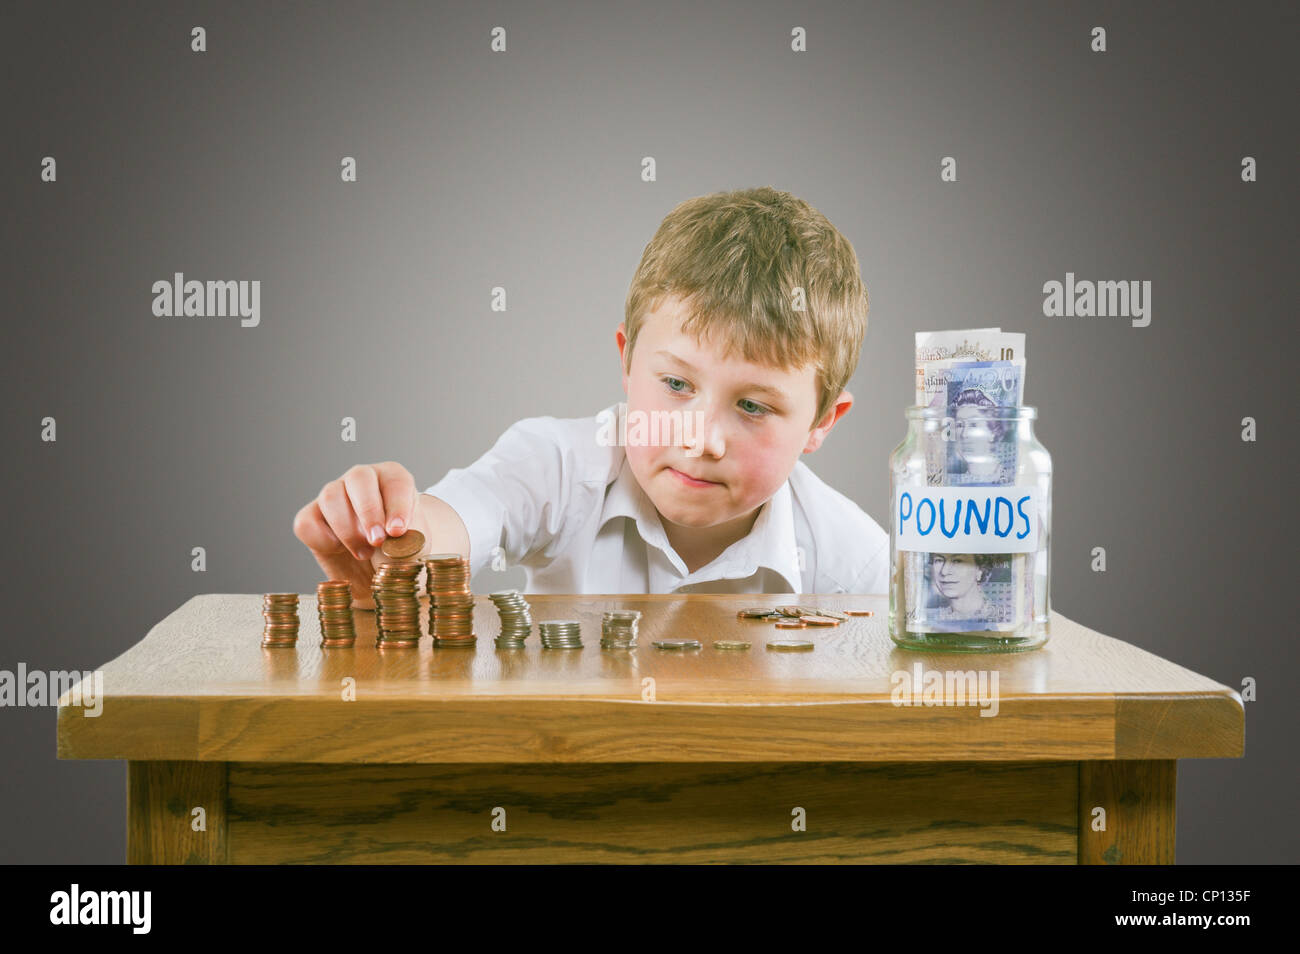 An 8 year old boy counting money Stock Photo